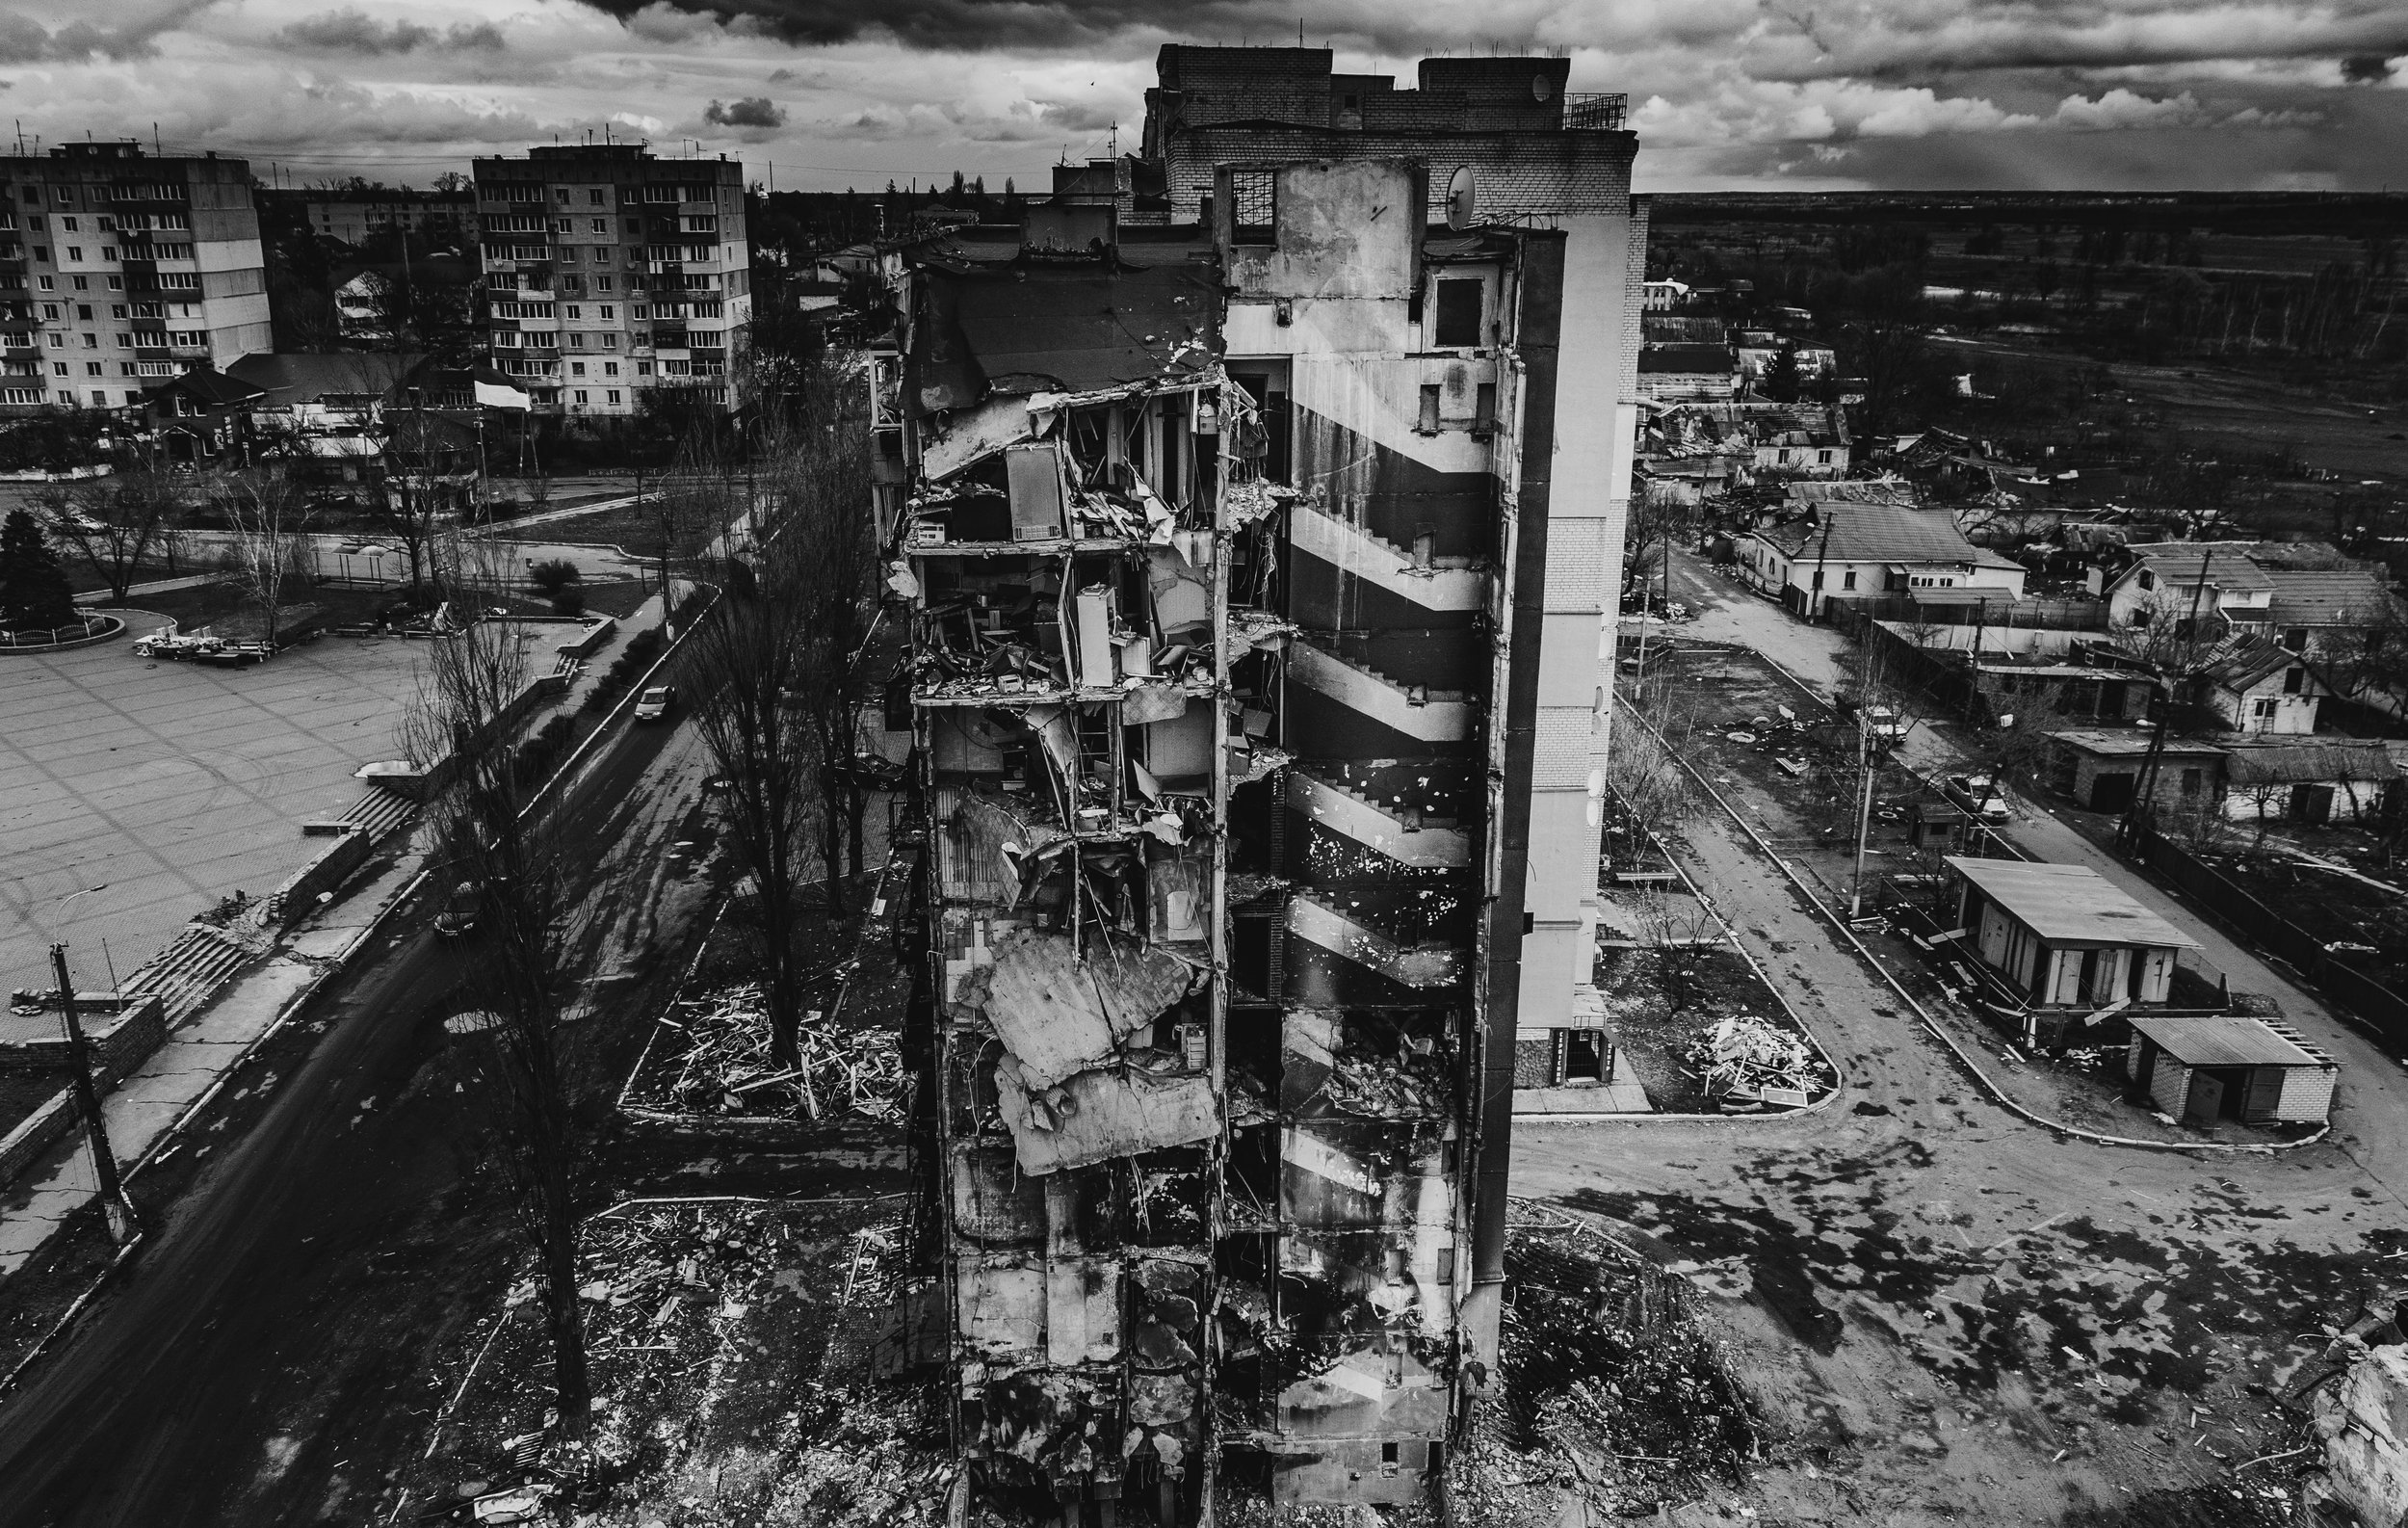  Damage seen from a rooftop in Borodyanka, Ukraine following the occupation. 